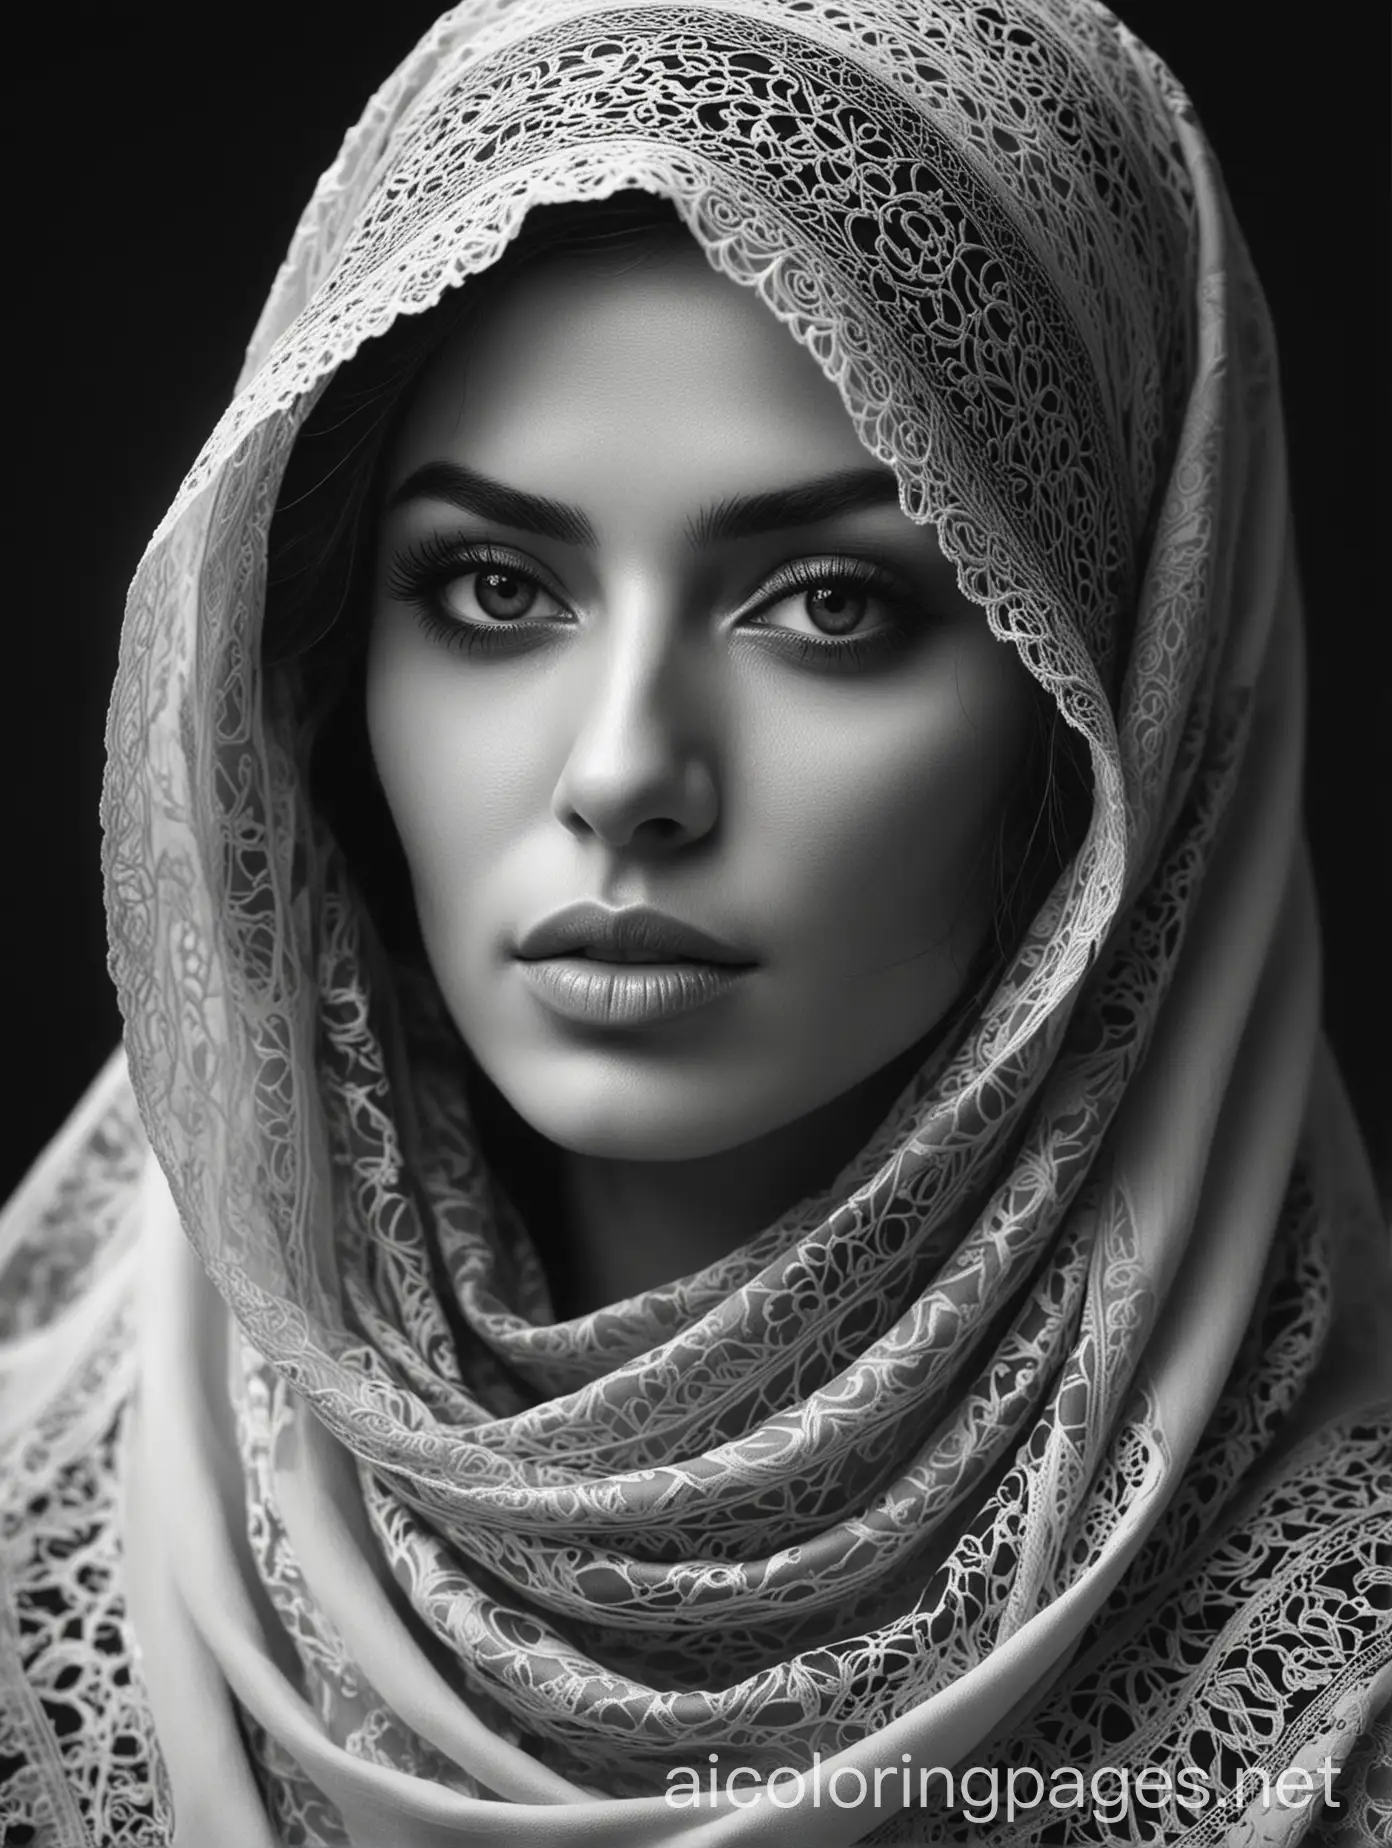 a black and white photo of a woman wearing a hat, beautiful artwork, veiled, beautiful art, beautiful woman, gorgeous art, gorgeous woman, beautiful burqa's woman, arabian art, beautiful arab woman, monochromatic airbrush painting, arabian beauty, beautiful and mysterious, black & white art, stunning artwork, elegant woman, mysterious woman, painting of beautiful, Coloring Page, black and white, line art, white background, Simplicity, Ample White Space